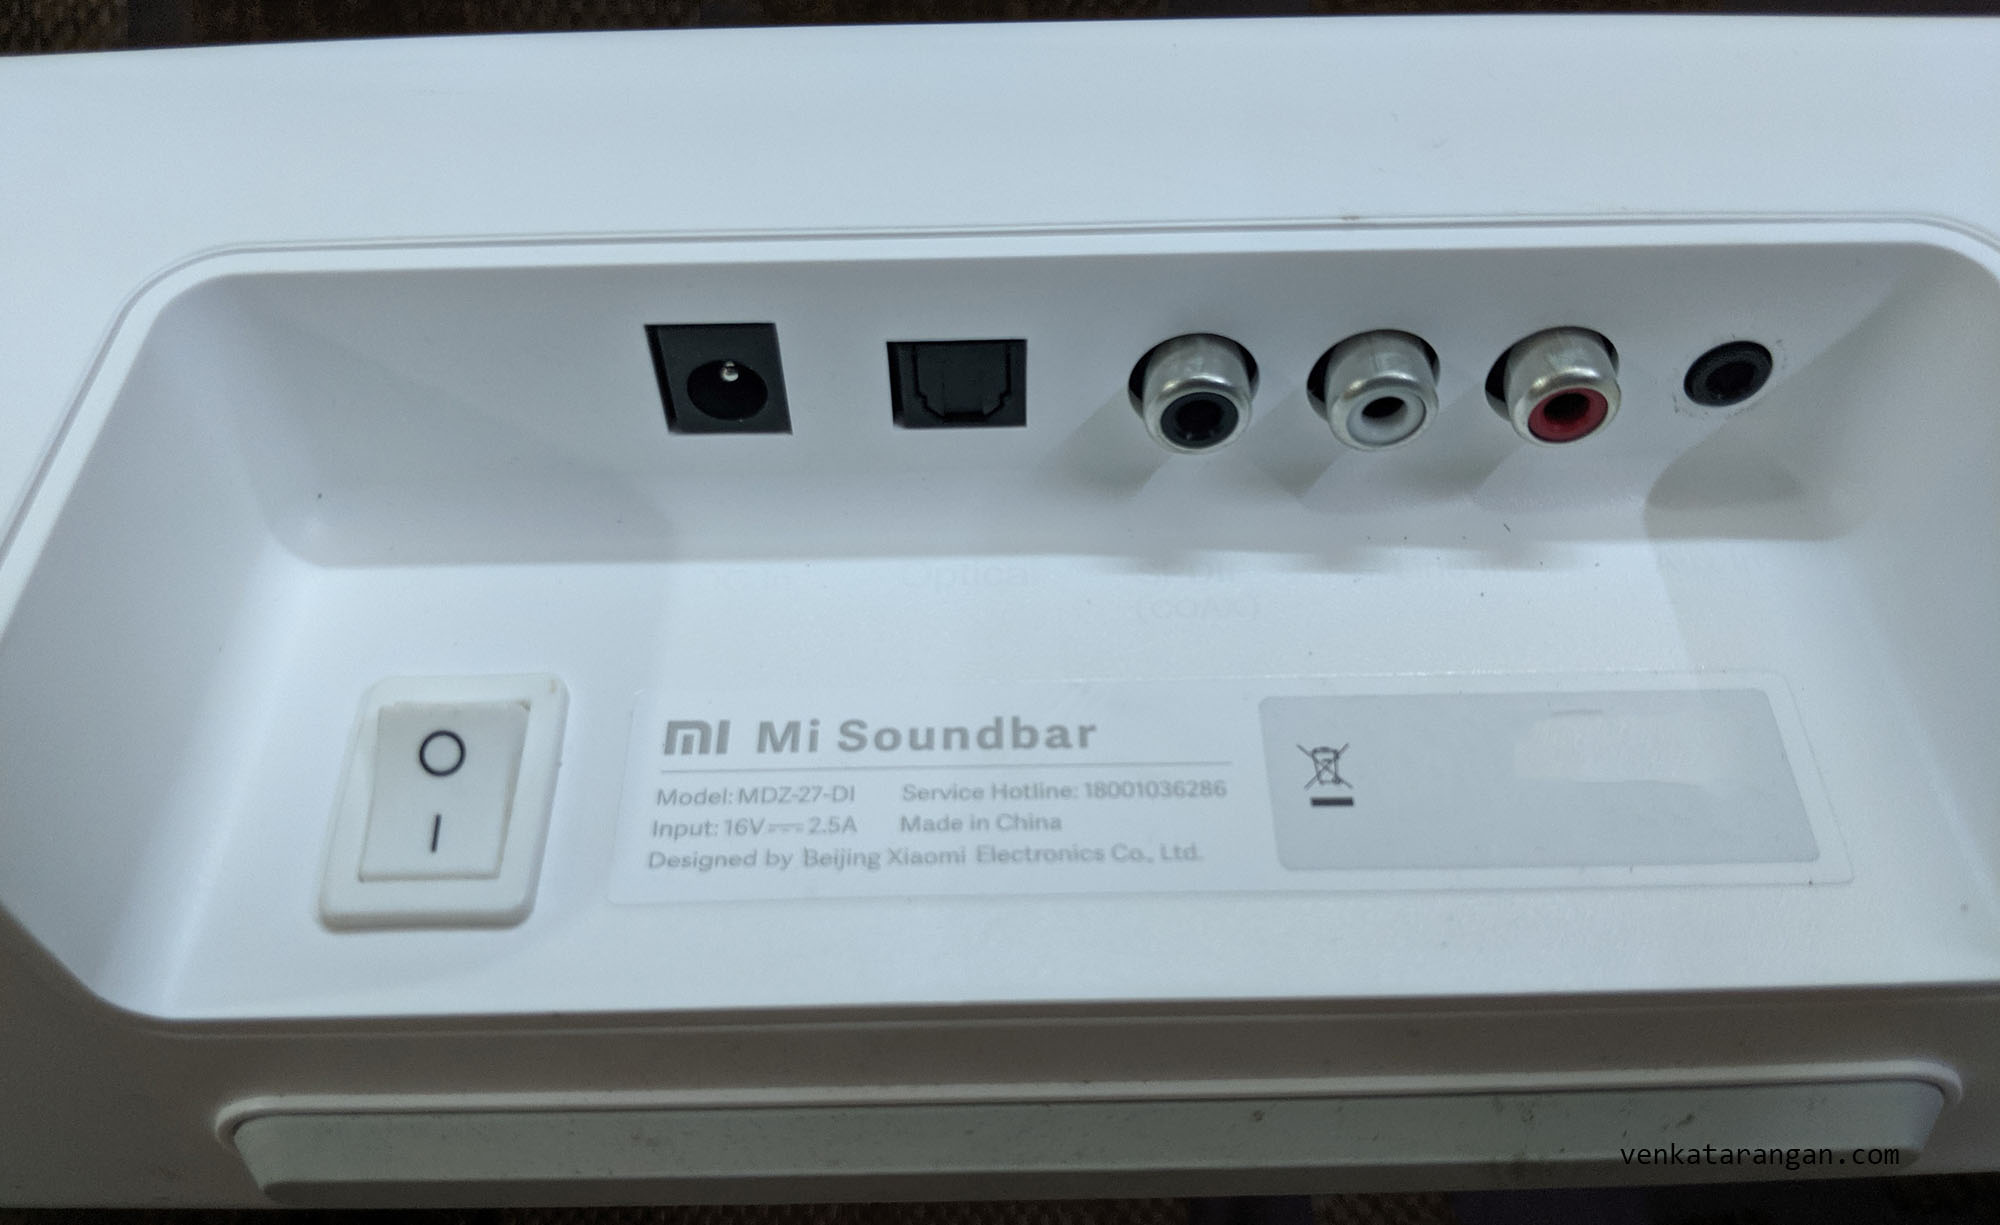 Mi Soundbar 8 has a good selection of ports apart from Bluetooth Wireless - Optical Audio, SPDIF, Audio Line-in (RCA) and Aux-In (3,5mm)